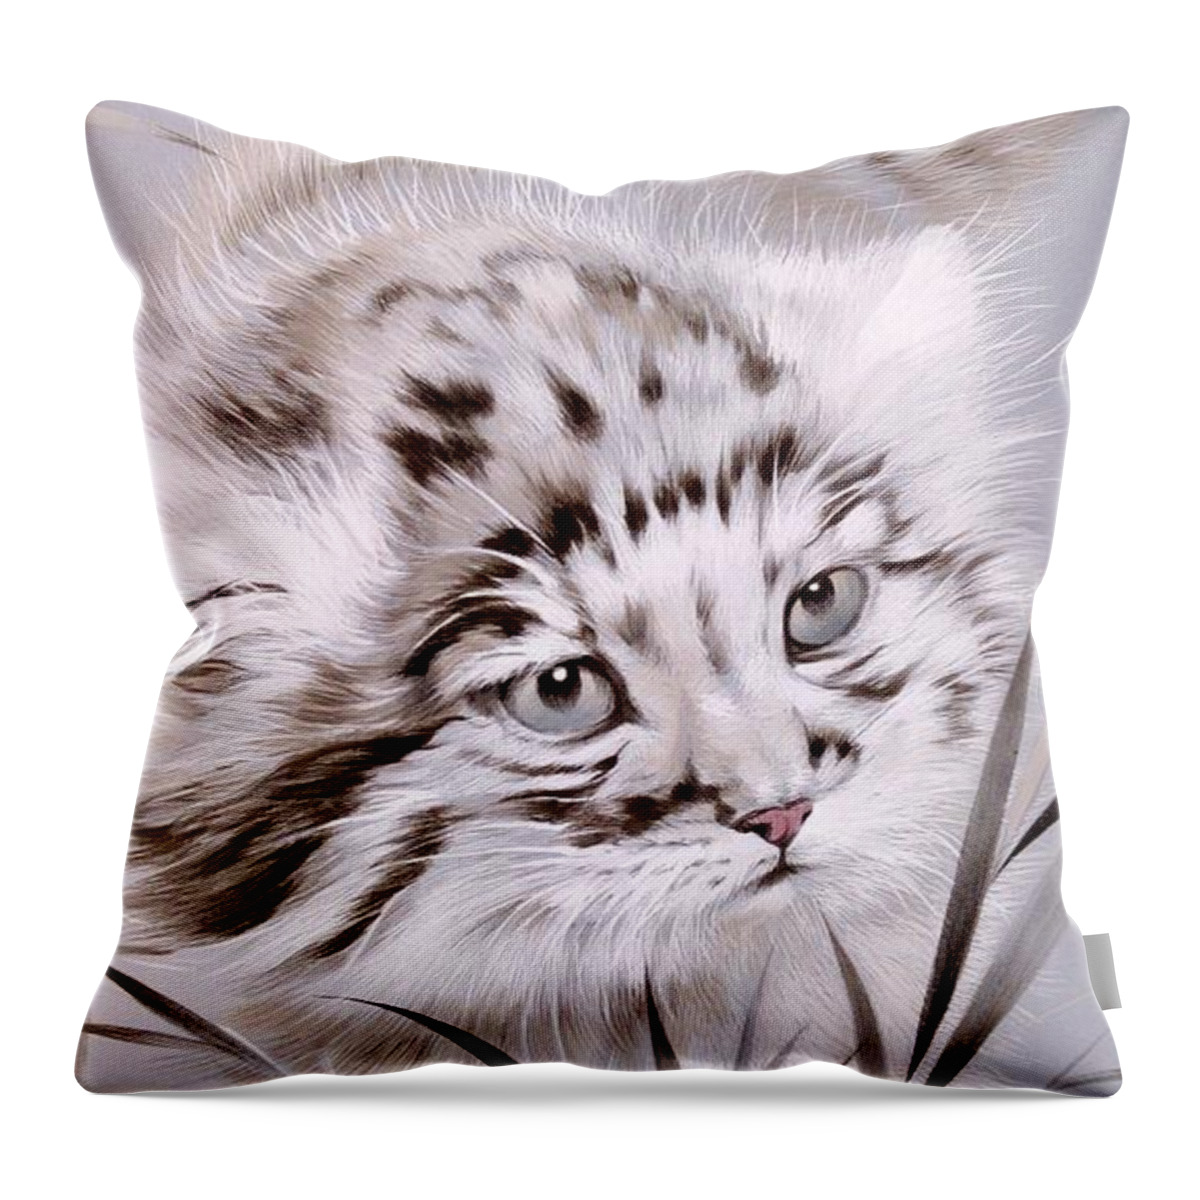 Russian Artists New Wave Throw Pillow featuring the painting Jungle Cat 1 by Alina Oseeva